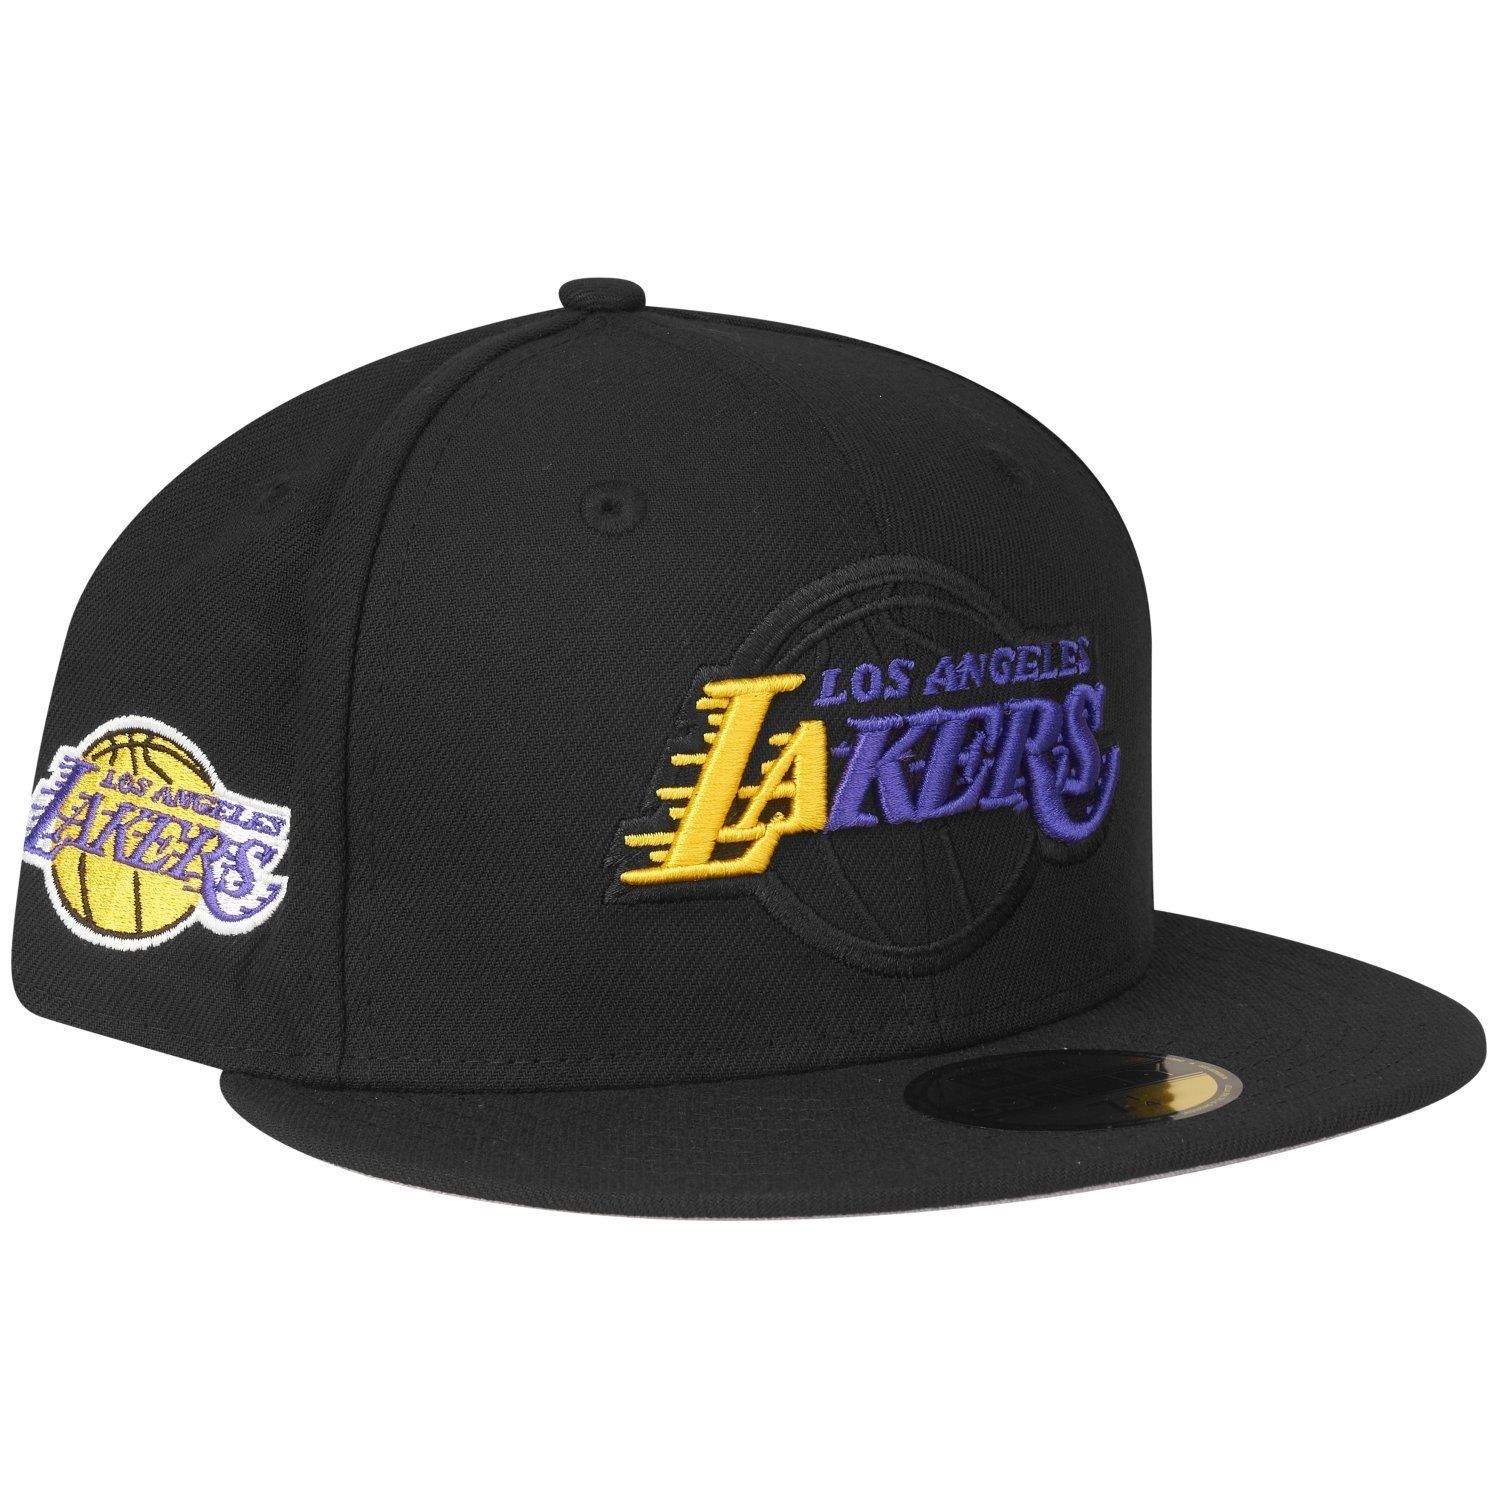 New Era Fitted Cap 59Fifty ELEMENTS Los Angeles Lakers